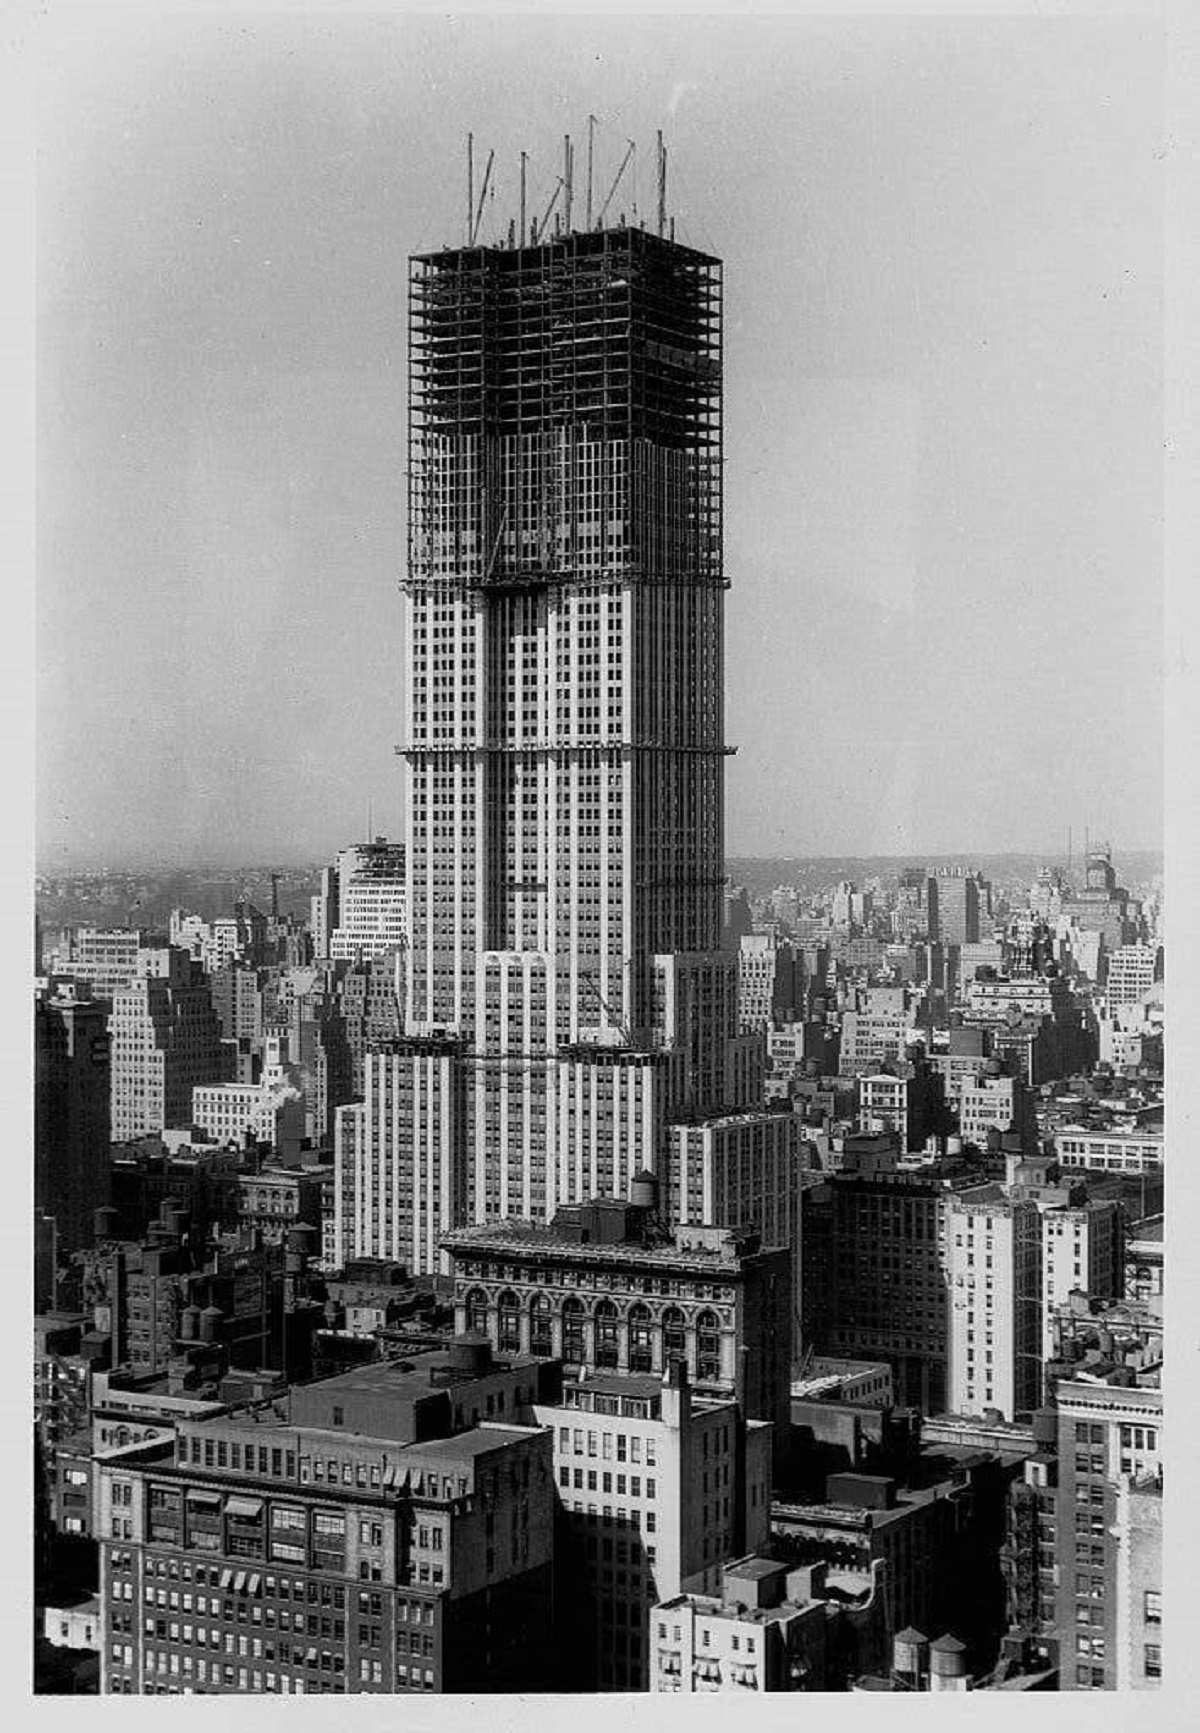 The picture, from 1930, shows what the Empire State Building looked like while it was under construction: